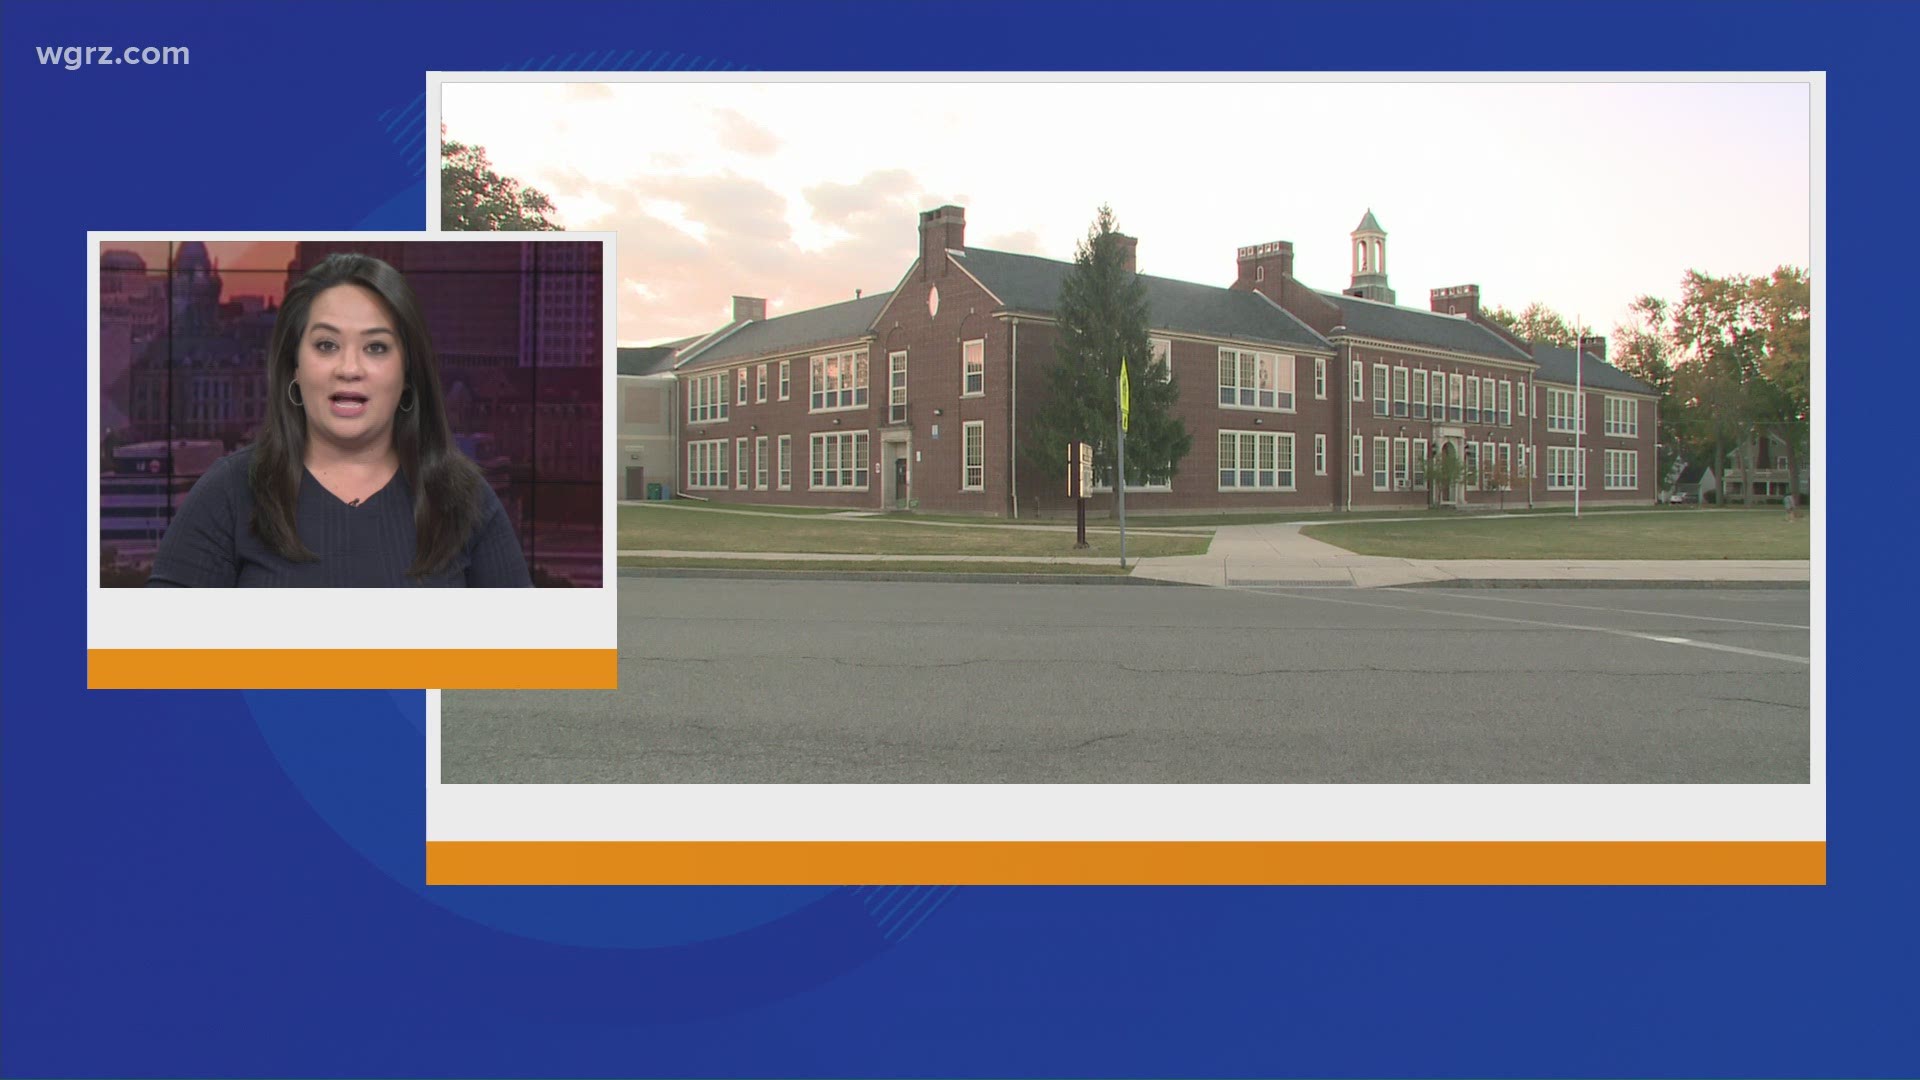 The school has been closed since September 28 after a staff member tested positive for COVID-19.